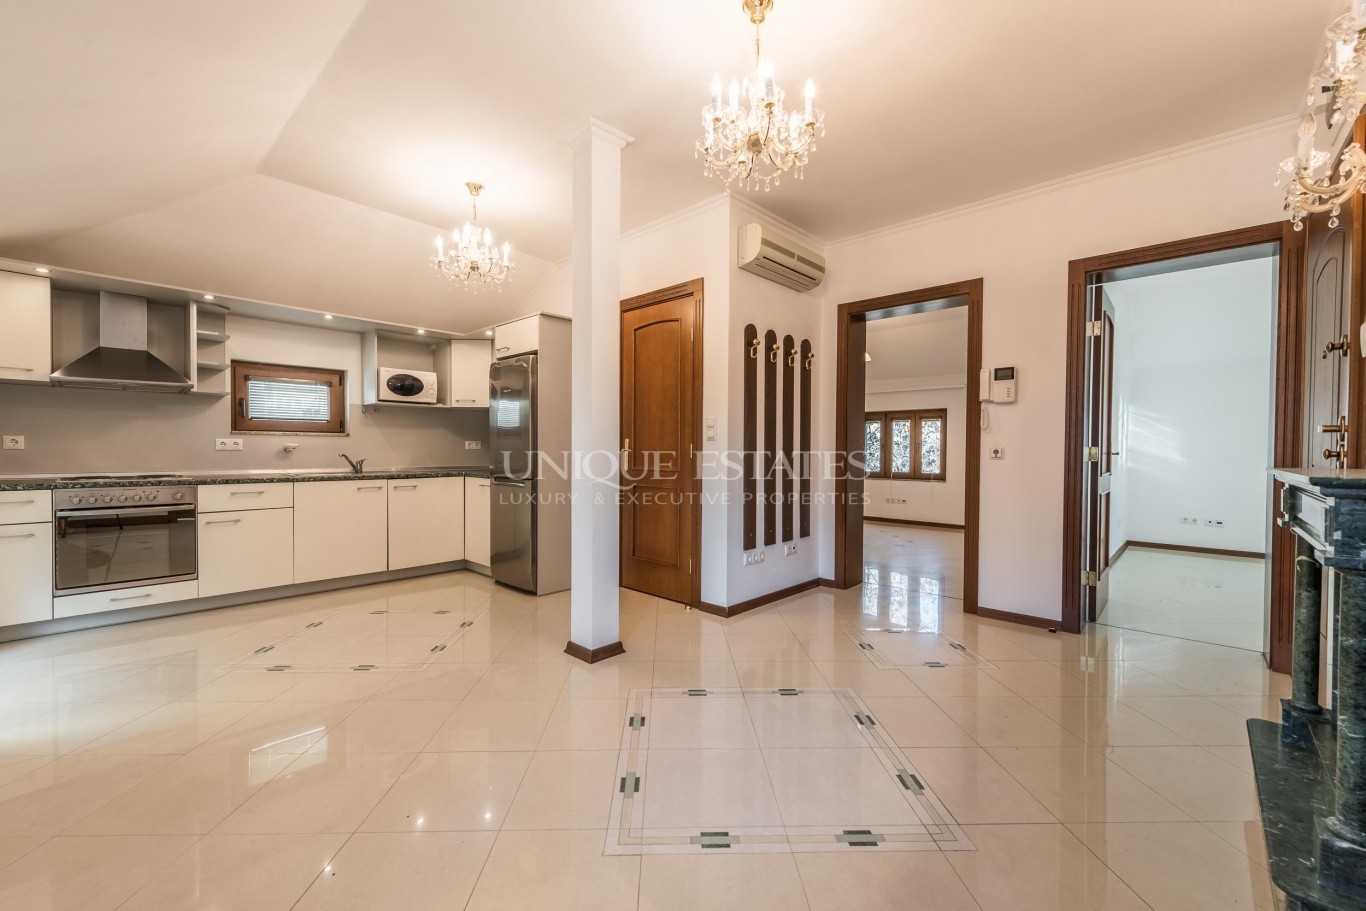 House for rent in Sofia, Downtown with listing ID: K12346 - image 4